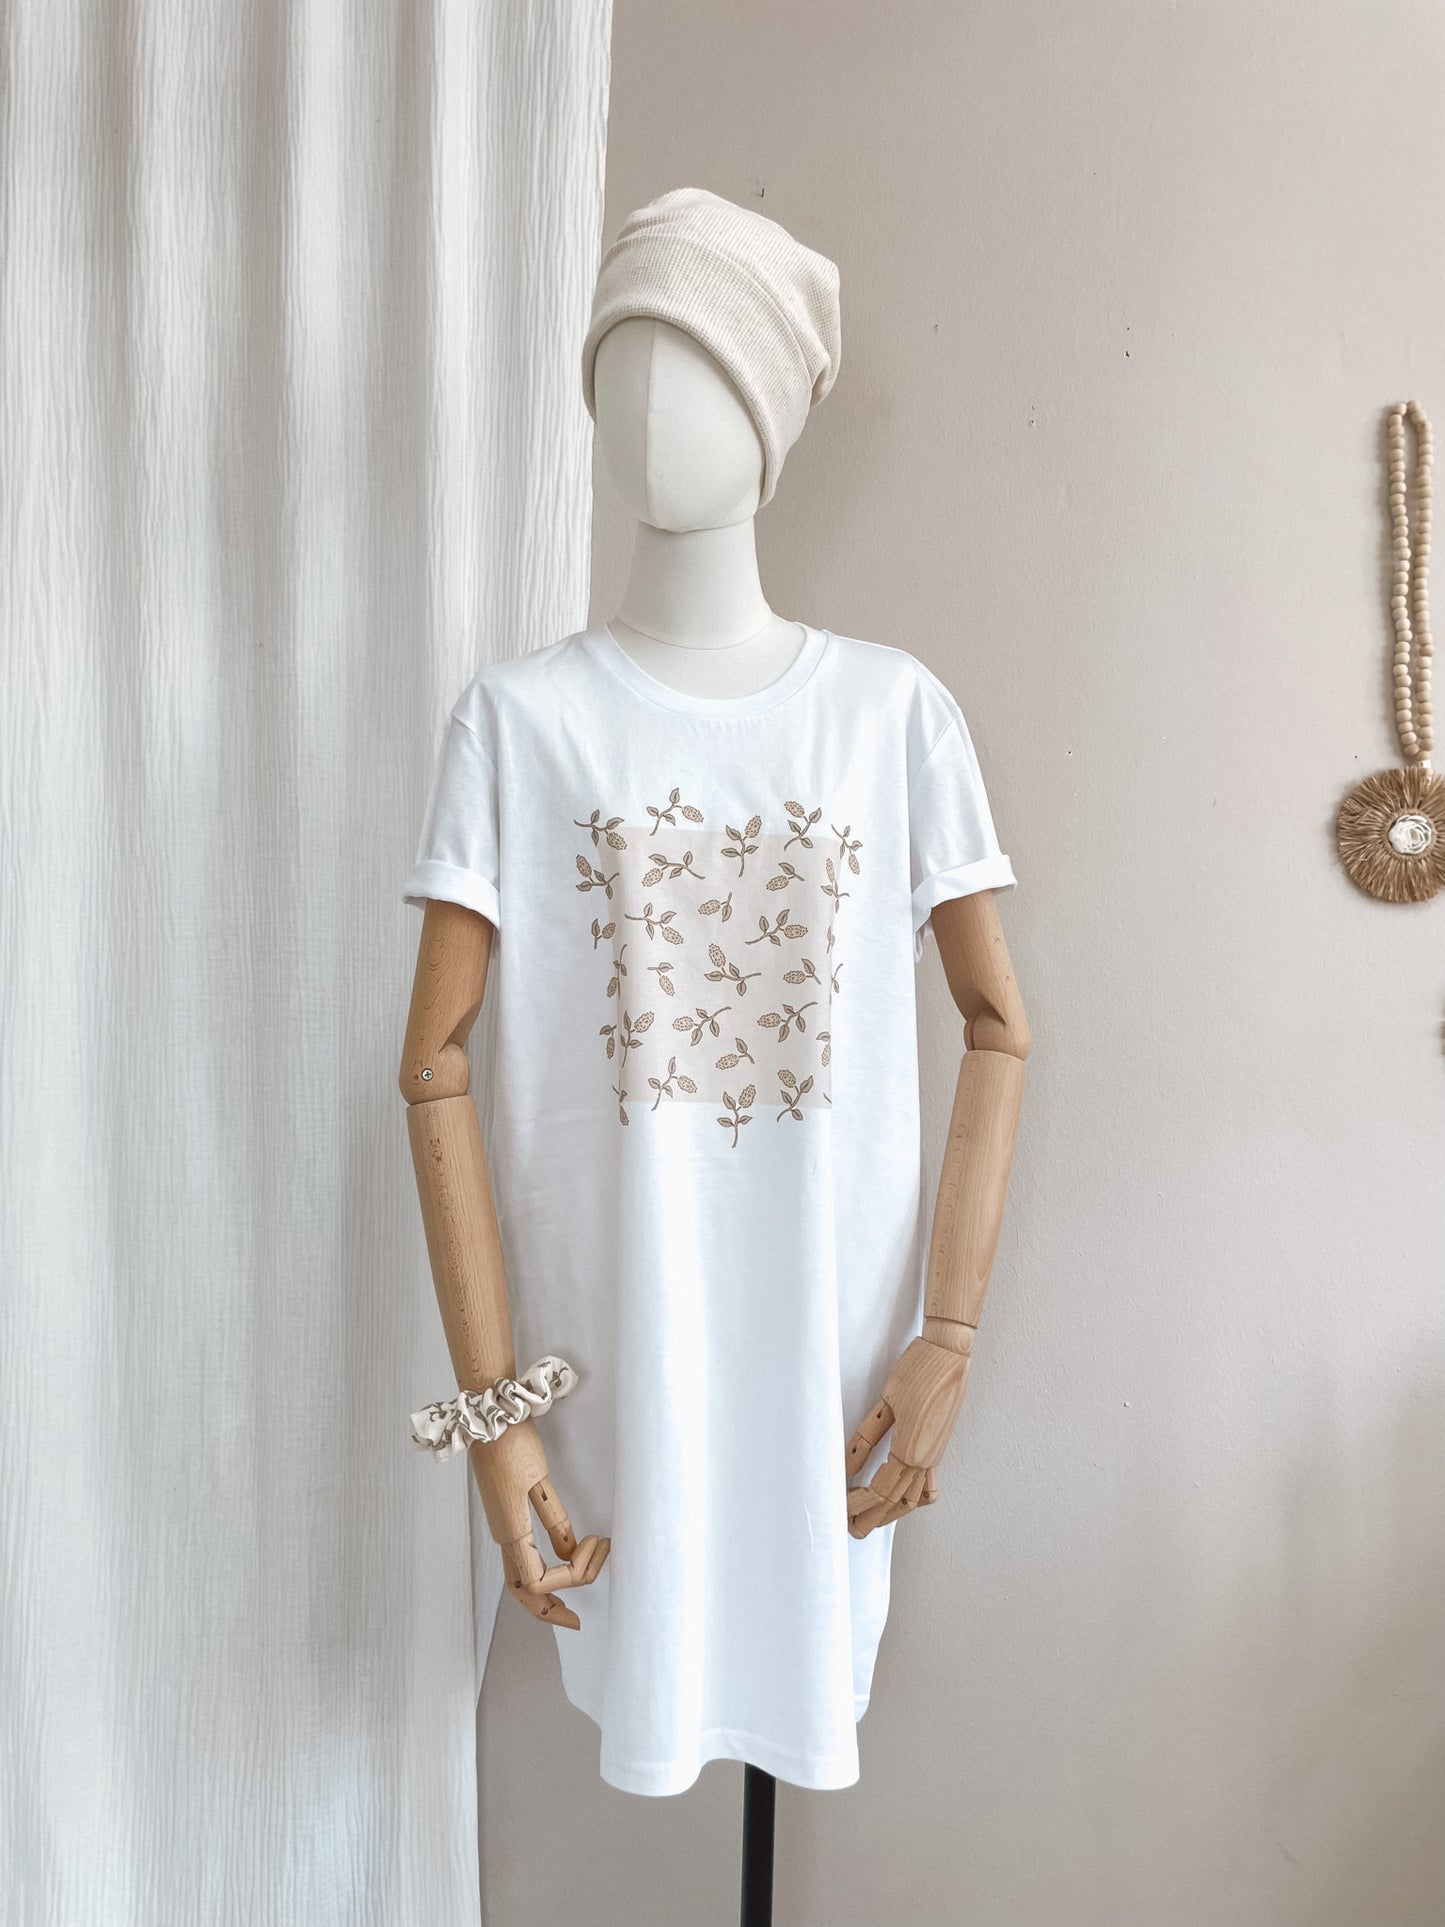 Load image into Gallery viewer, T-shirt dress / just floral / white
